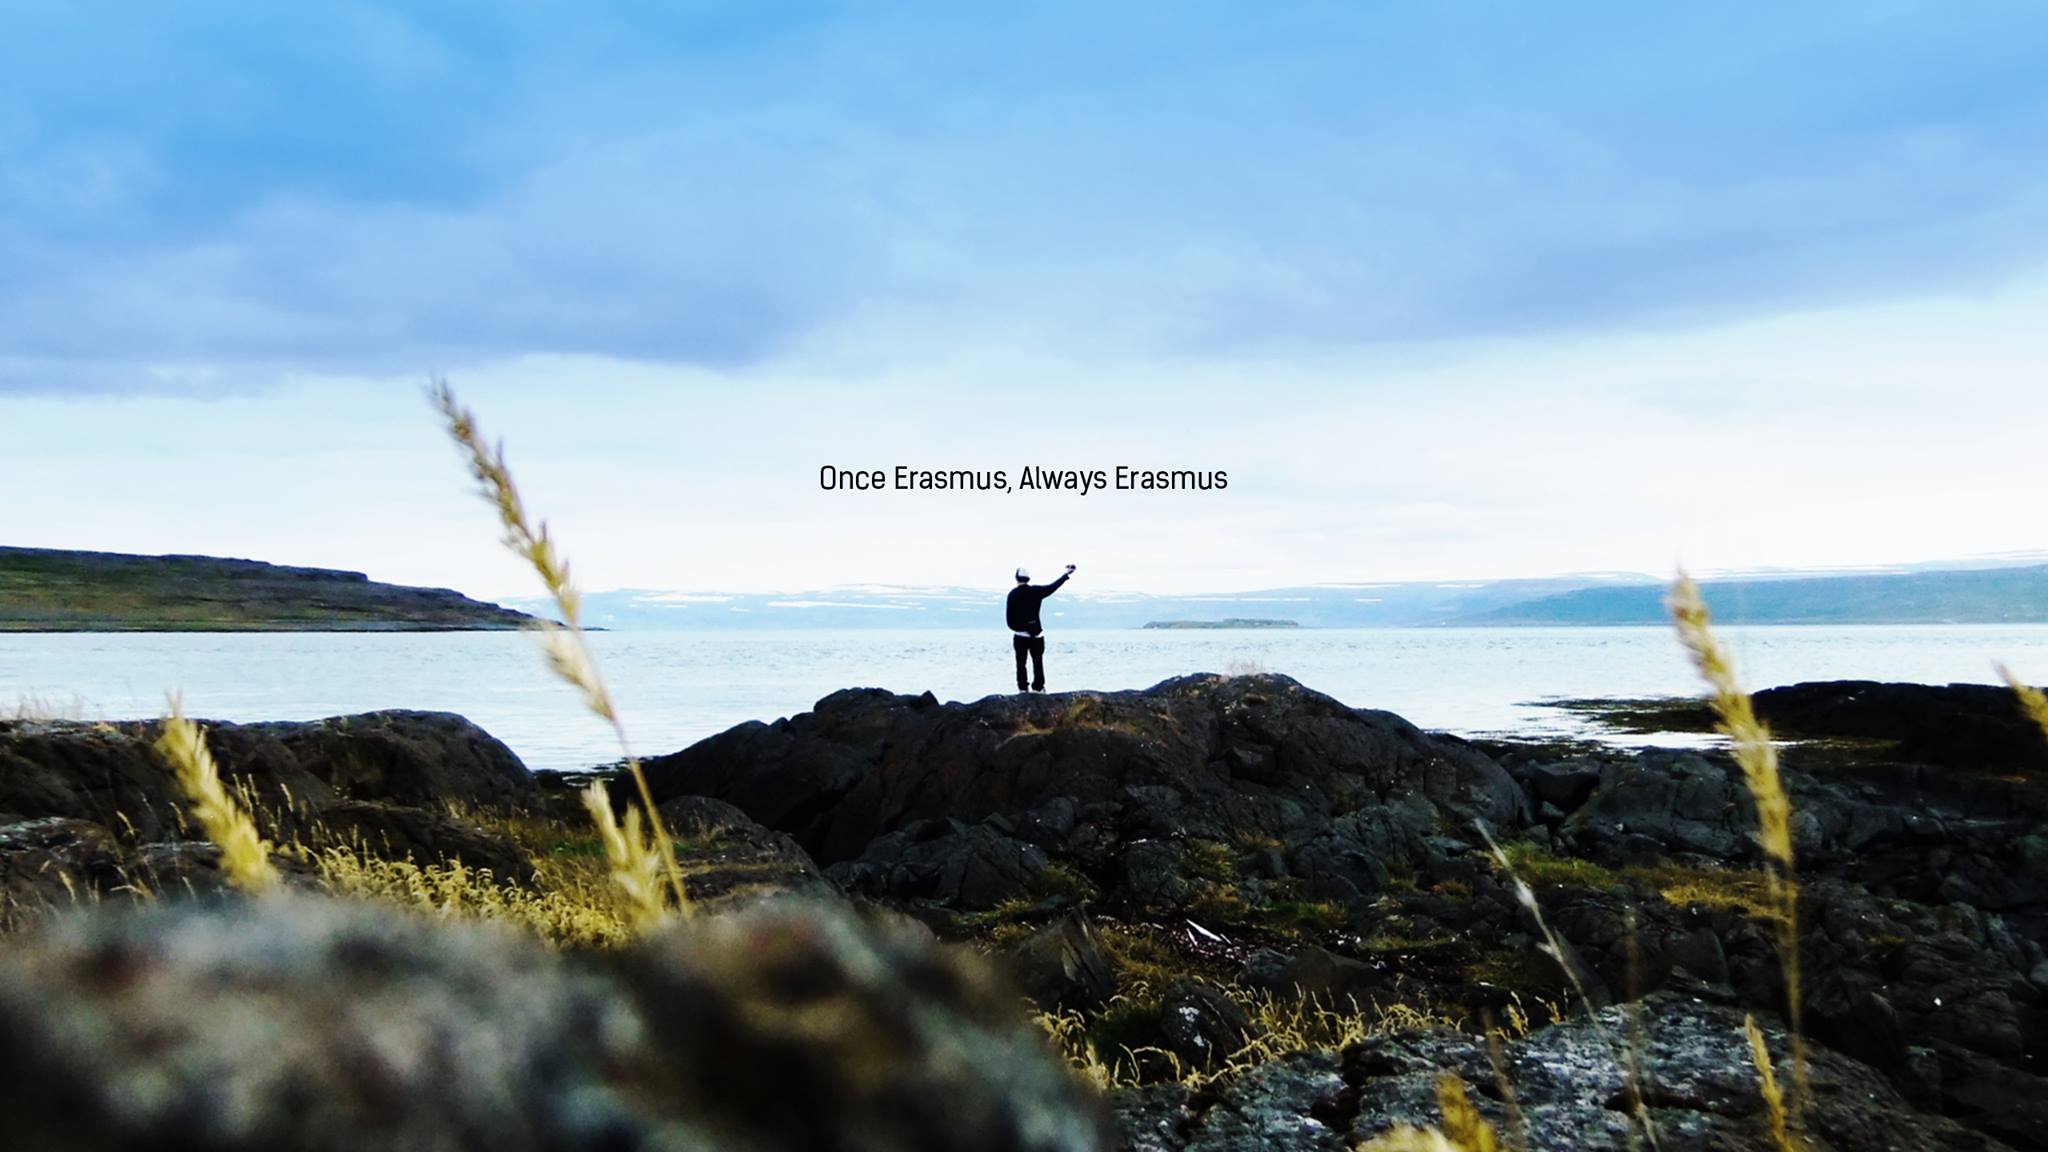 Patrick standing in front of a panoramic view in Iceland. The words "Once Erasmus, Always Erasmus" written over his head.